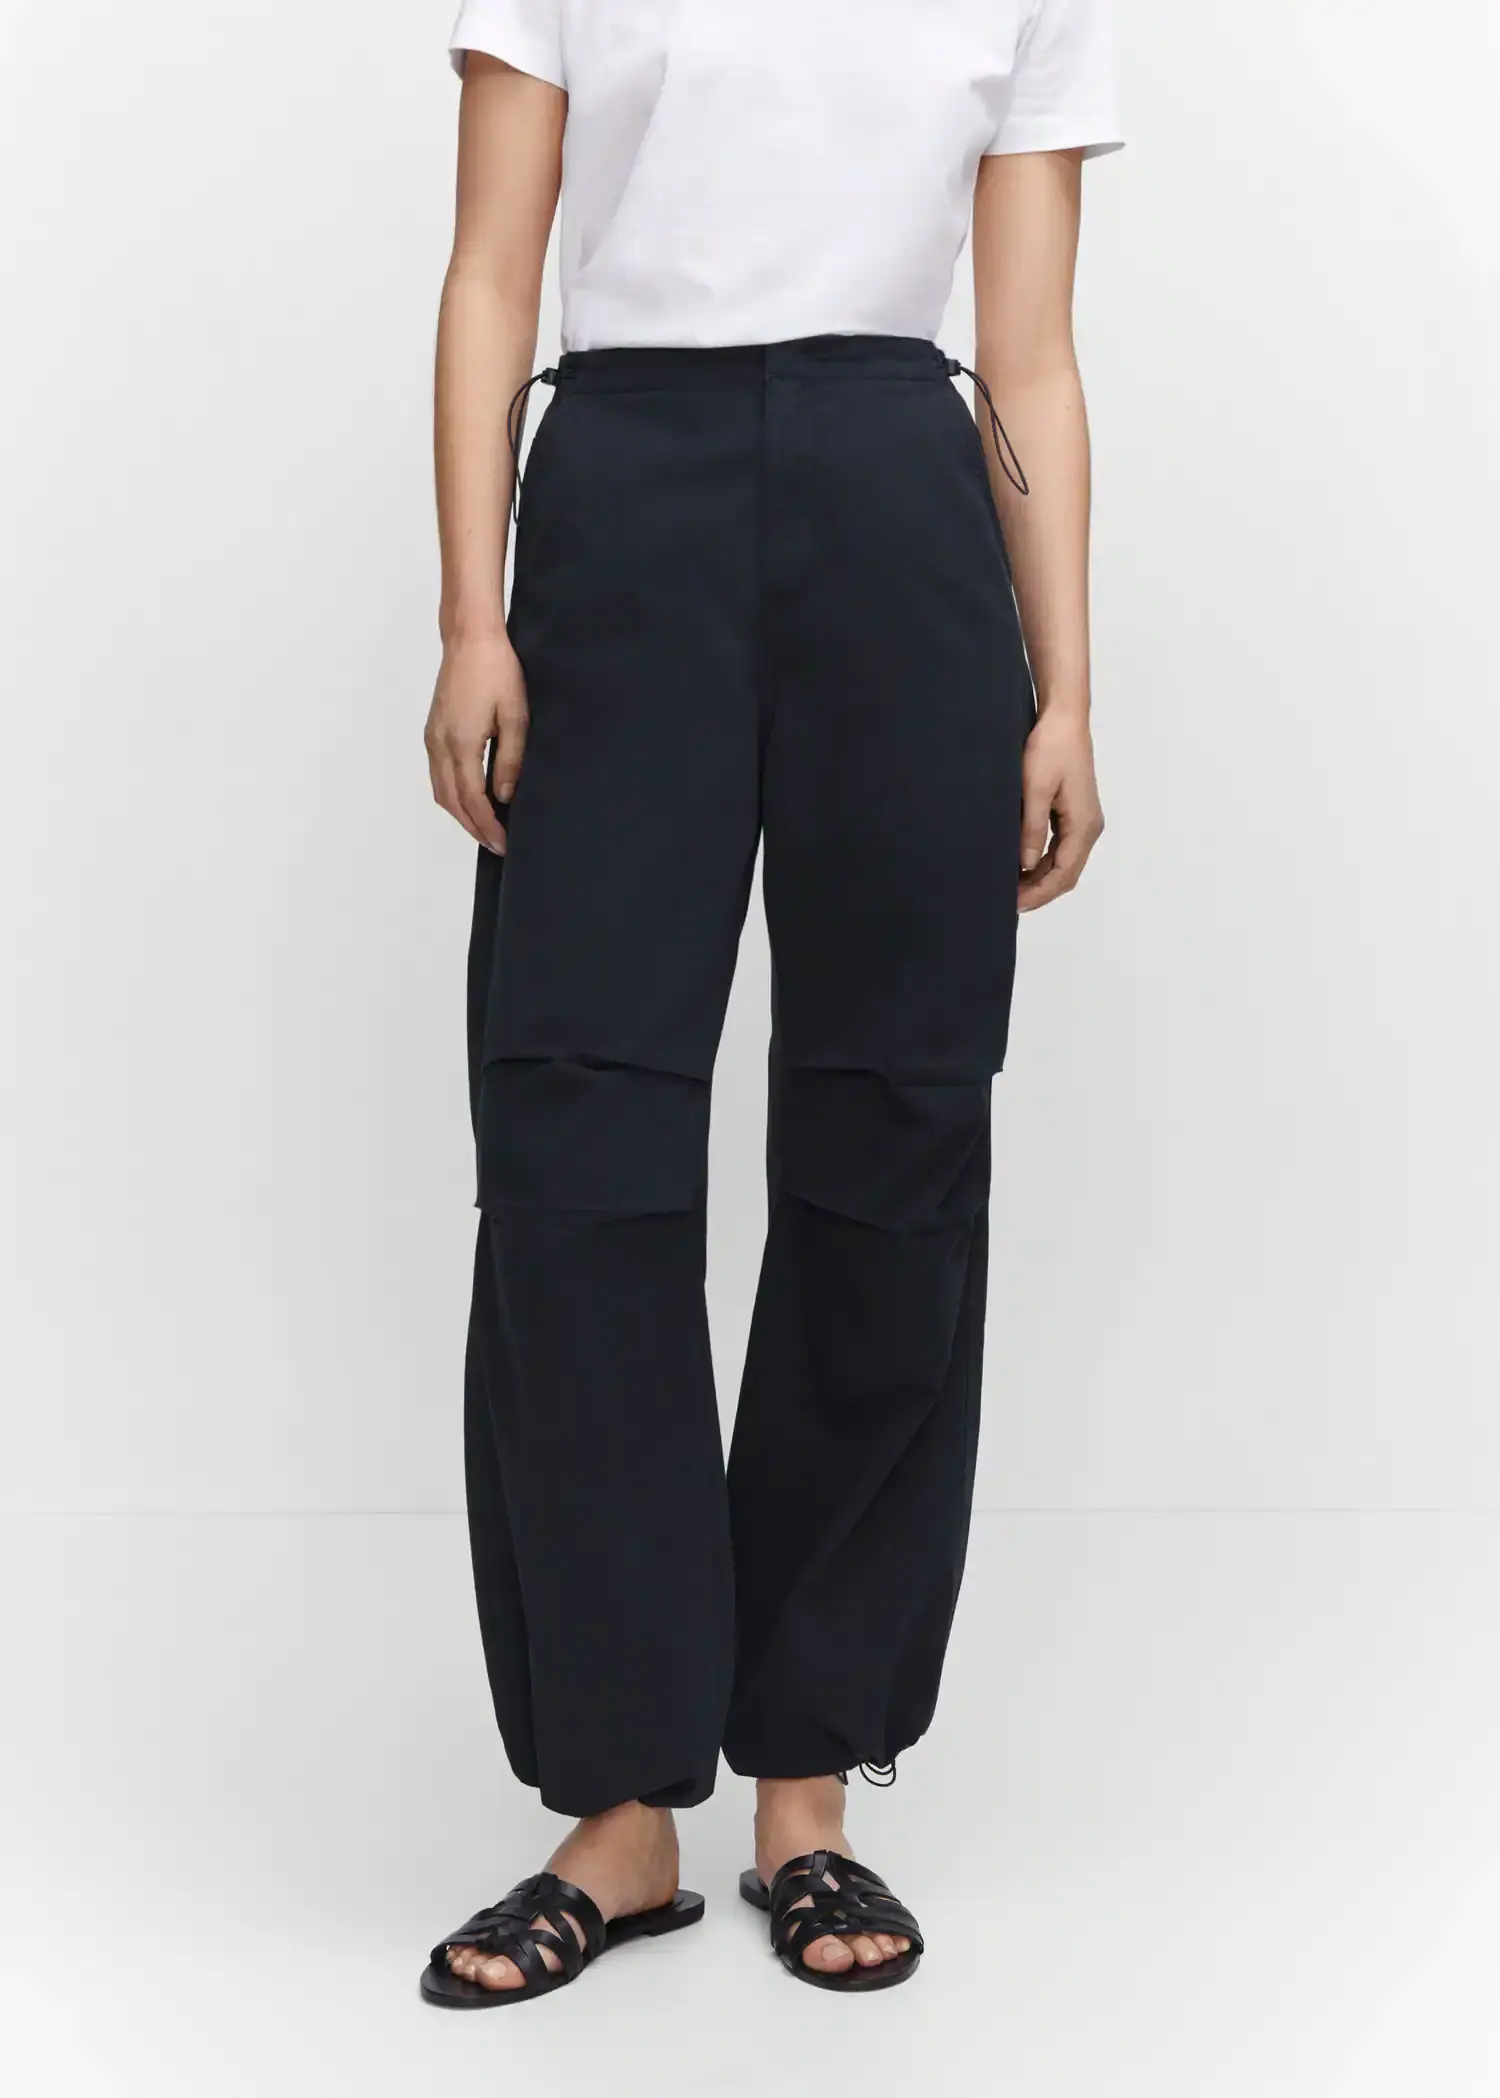 Mango Parachute trousers. a person standing wearing a pair of black pants. 